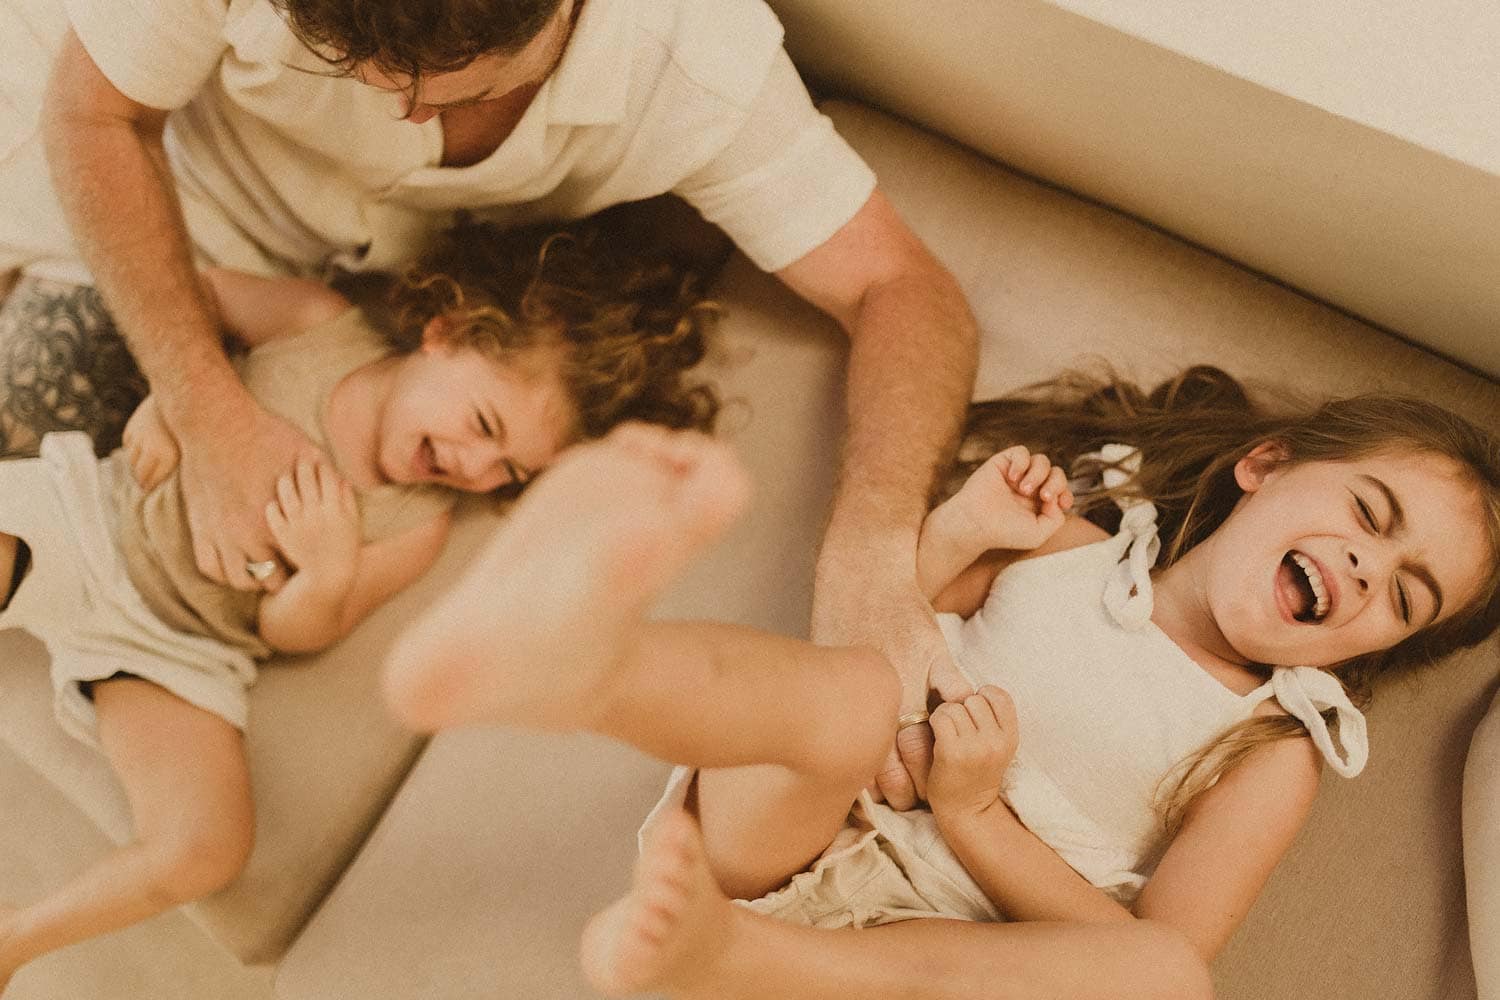 Family-photography-sutherland-shire-bireds-eye-view-of-young-girl-and-boy-being-tickled-on-a-beige-sofa-by-their-dad-whilst-they-giggle